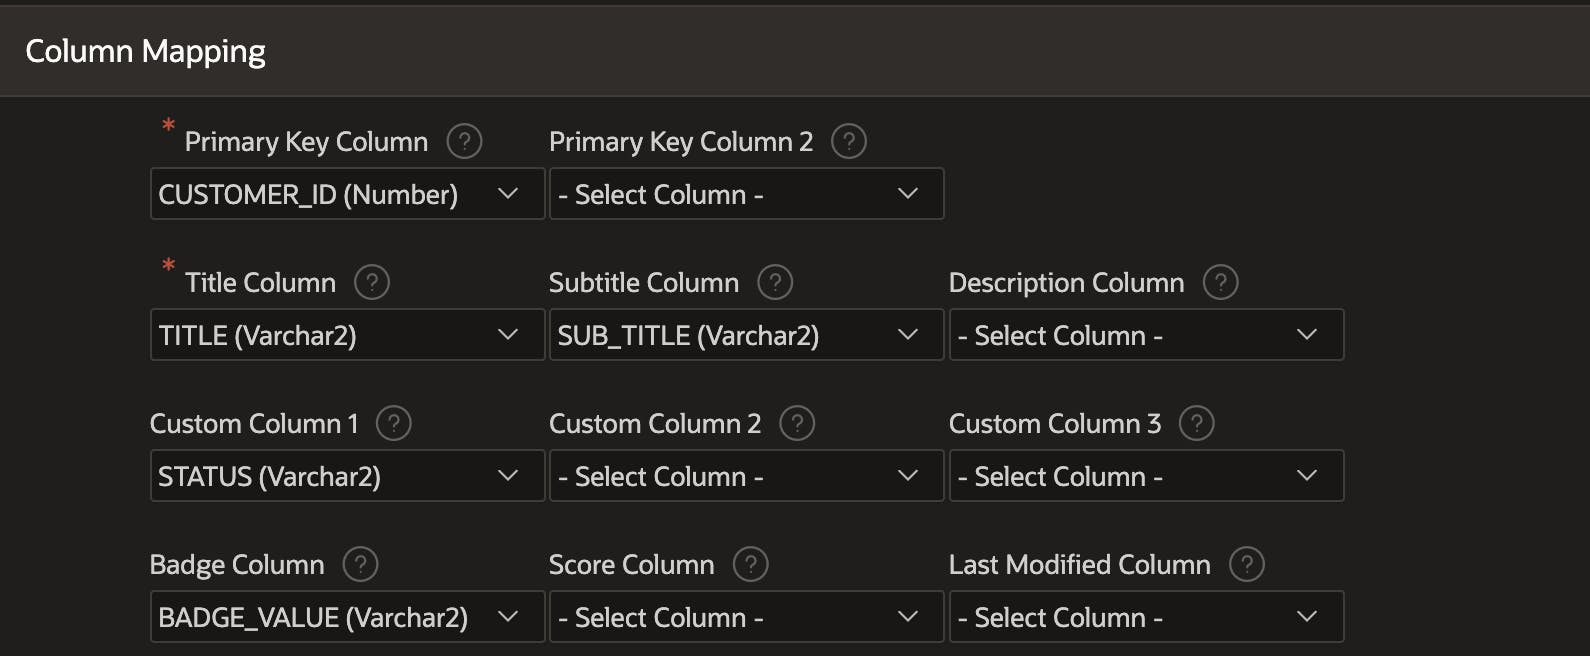 APEX Application Search Configuration 3 Column Mapping